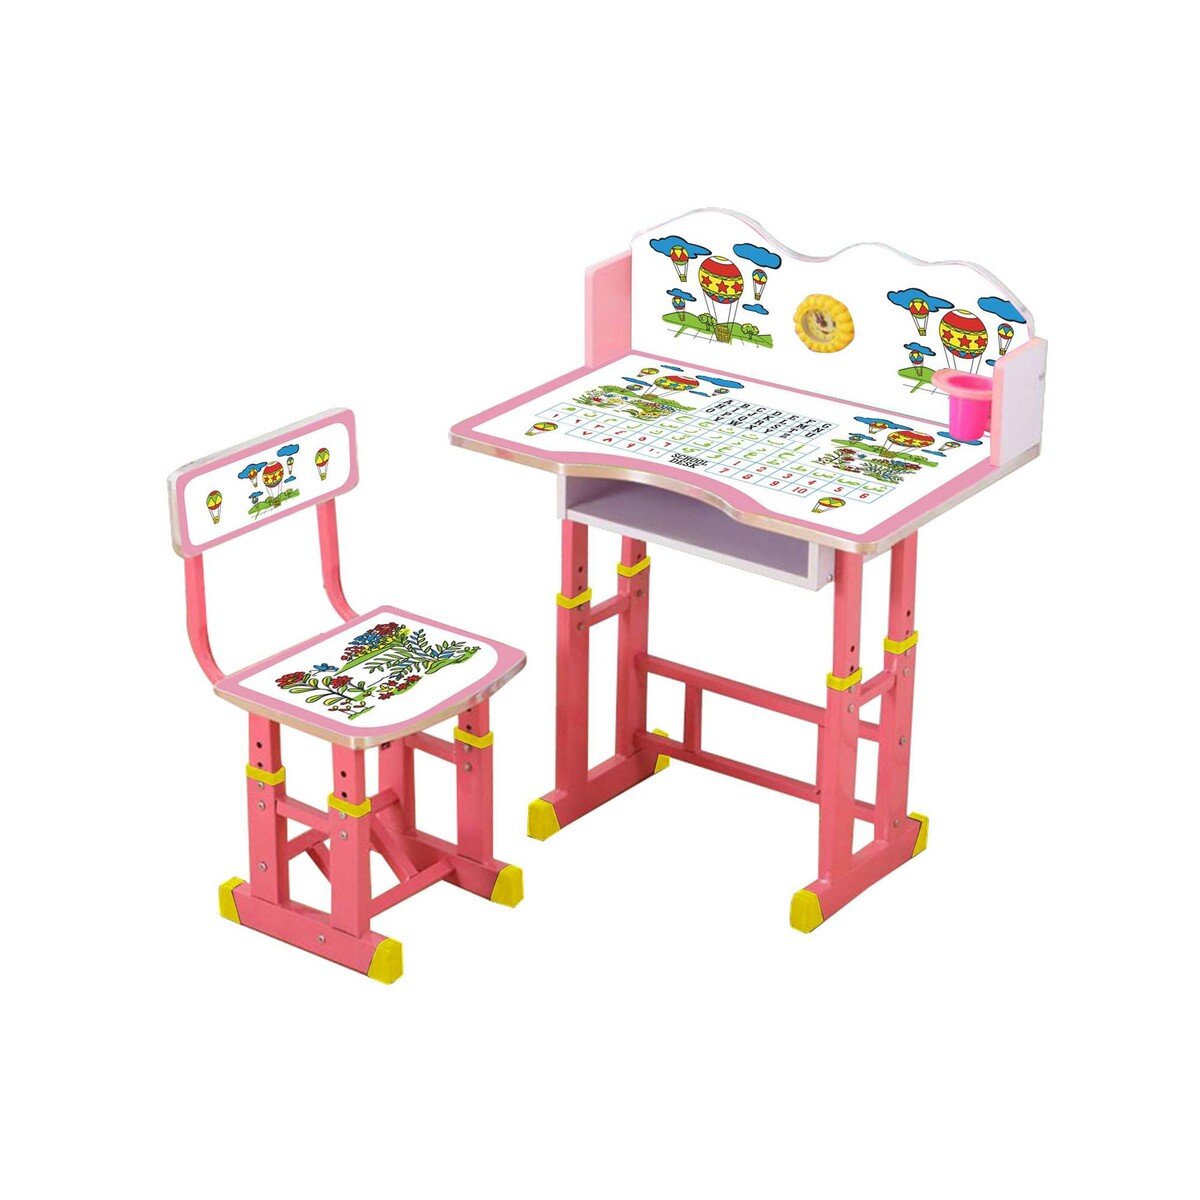 Maple Leaf Study Table & Chair KT066 Pink Assorted Colors & Designs